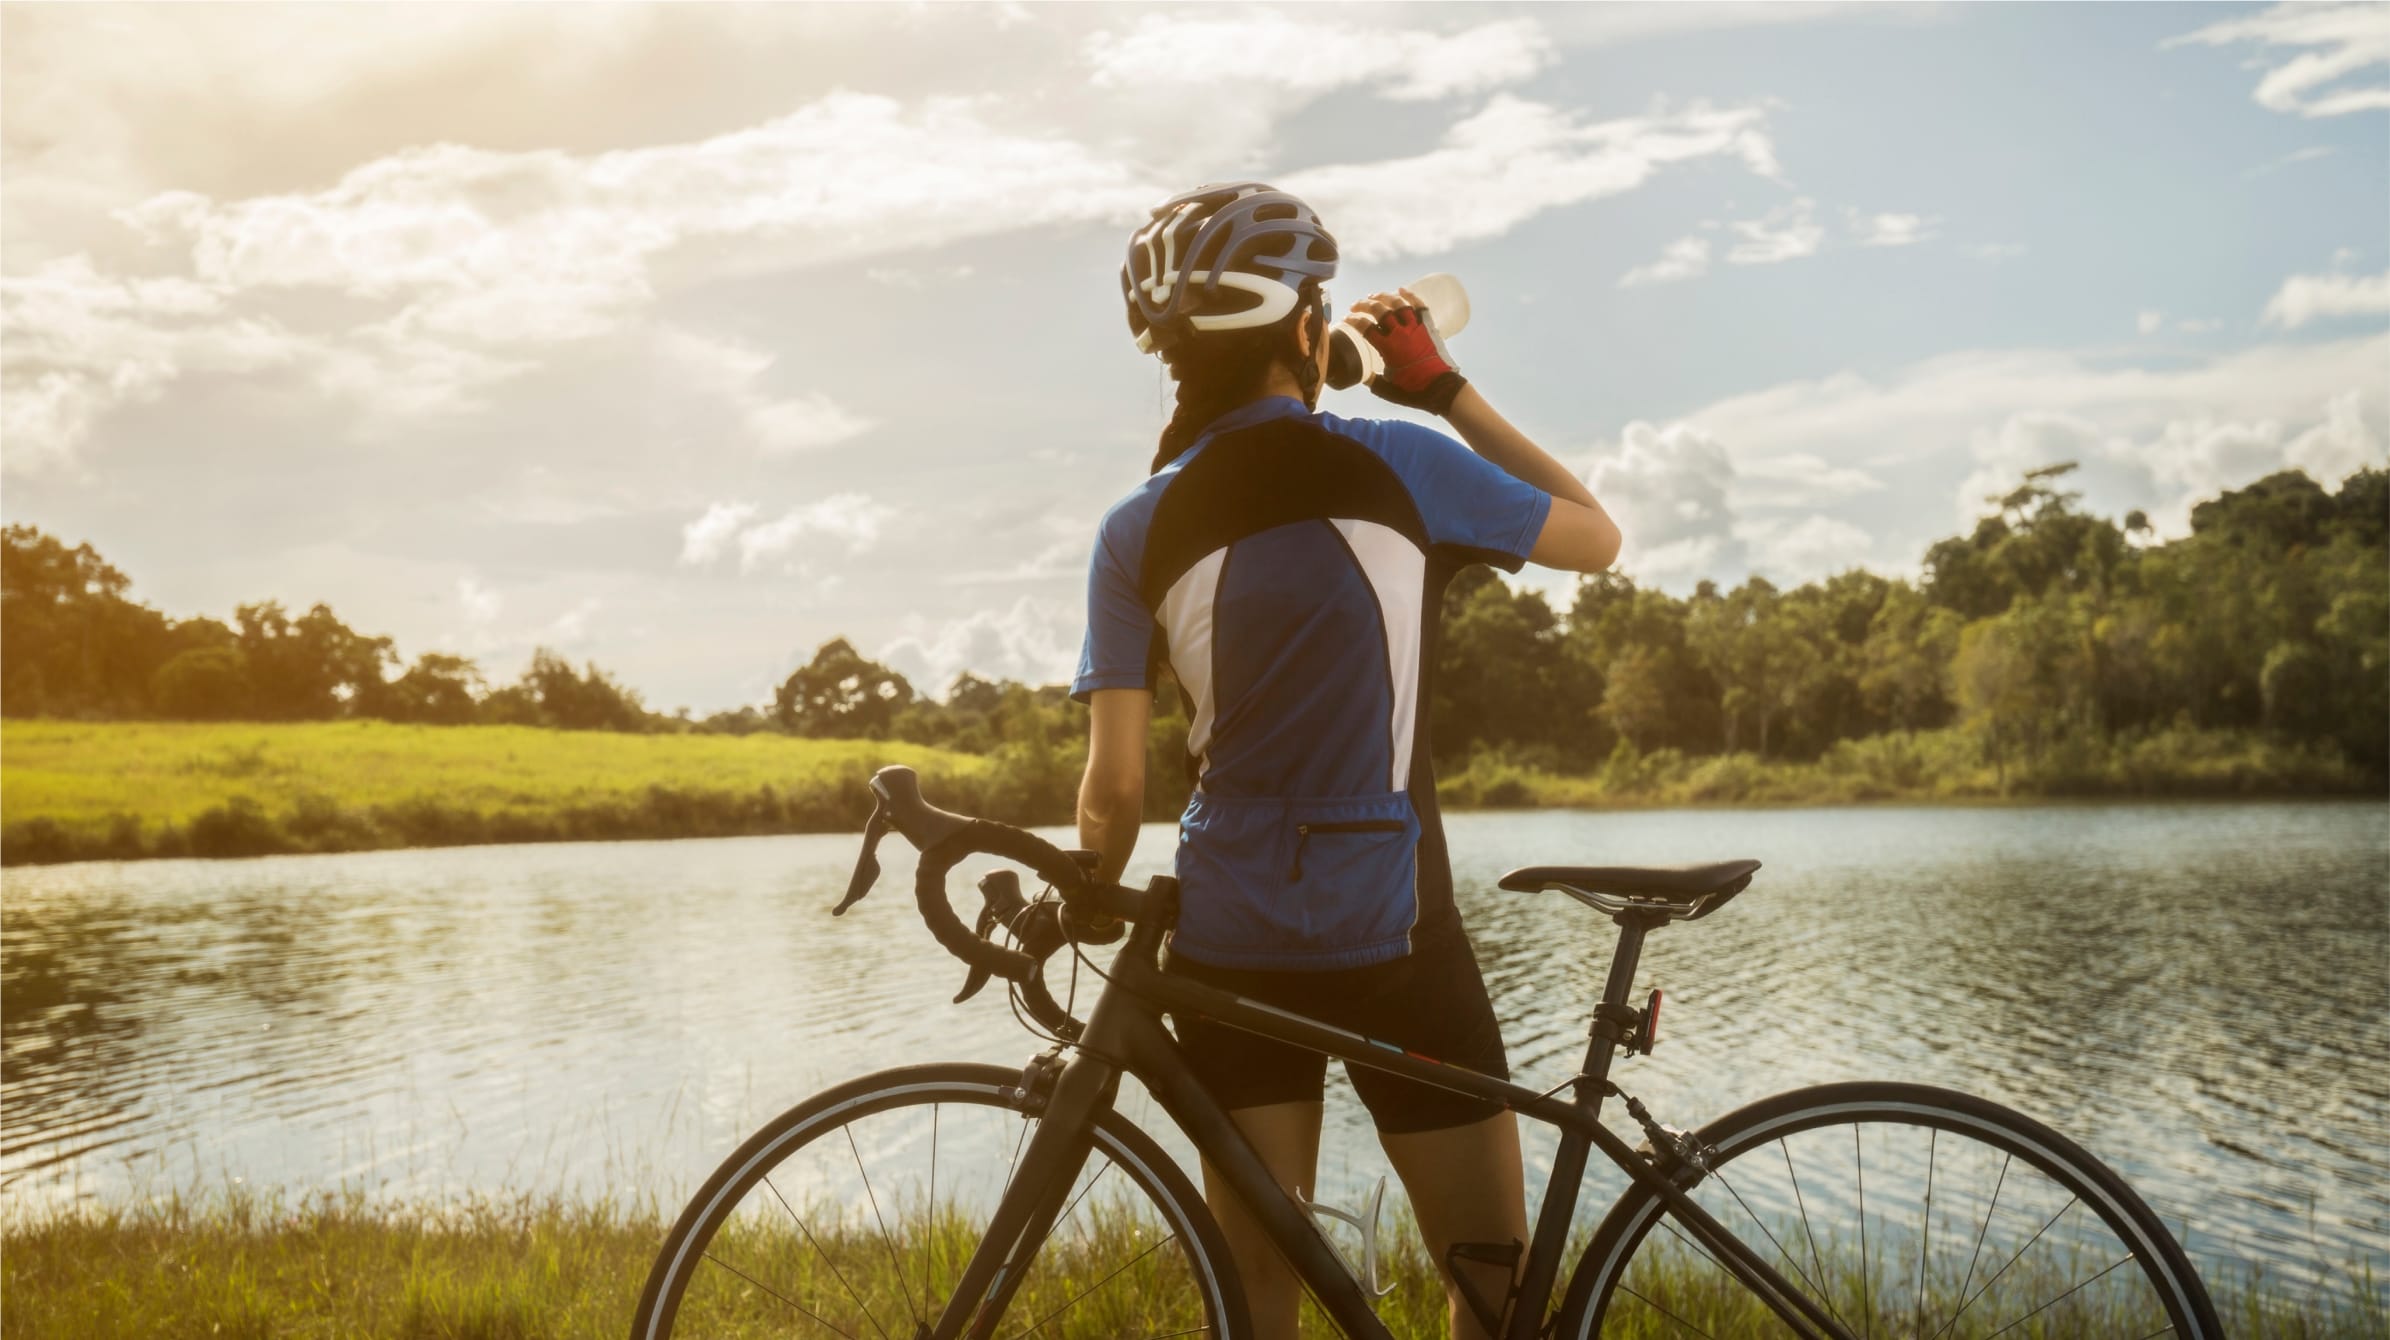 A woman cyclist taking a break next to a lake. She has a high end racing bike leaning against her whilst she takes a drink of Seltza water from a sports bottle. In the background are trees and grass.